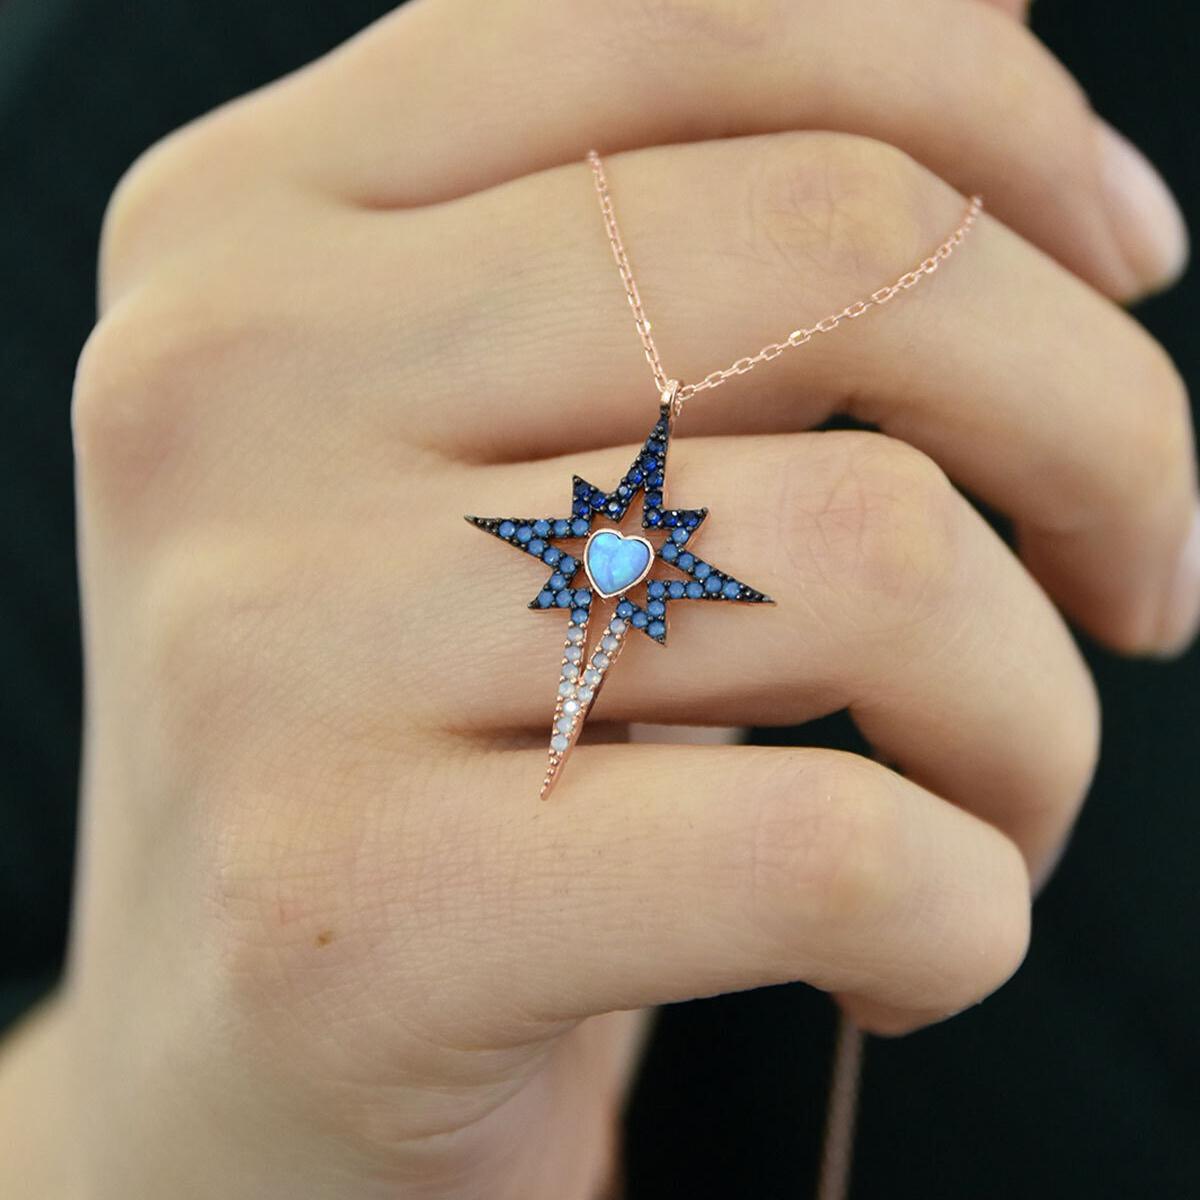 North Star Necklace • Blue Zircon Necklace • Fire Opal Necklace - Trending Silver Gifts